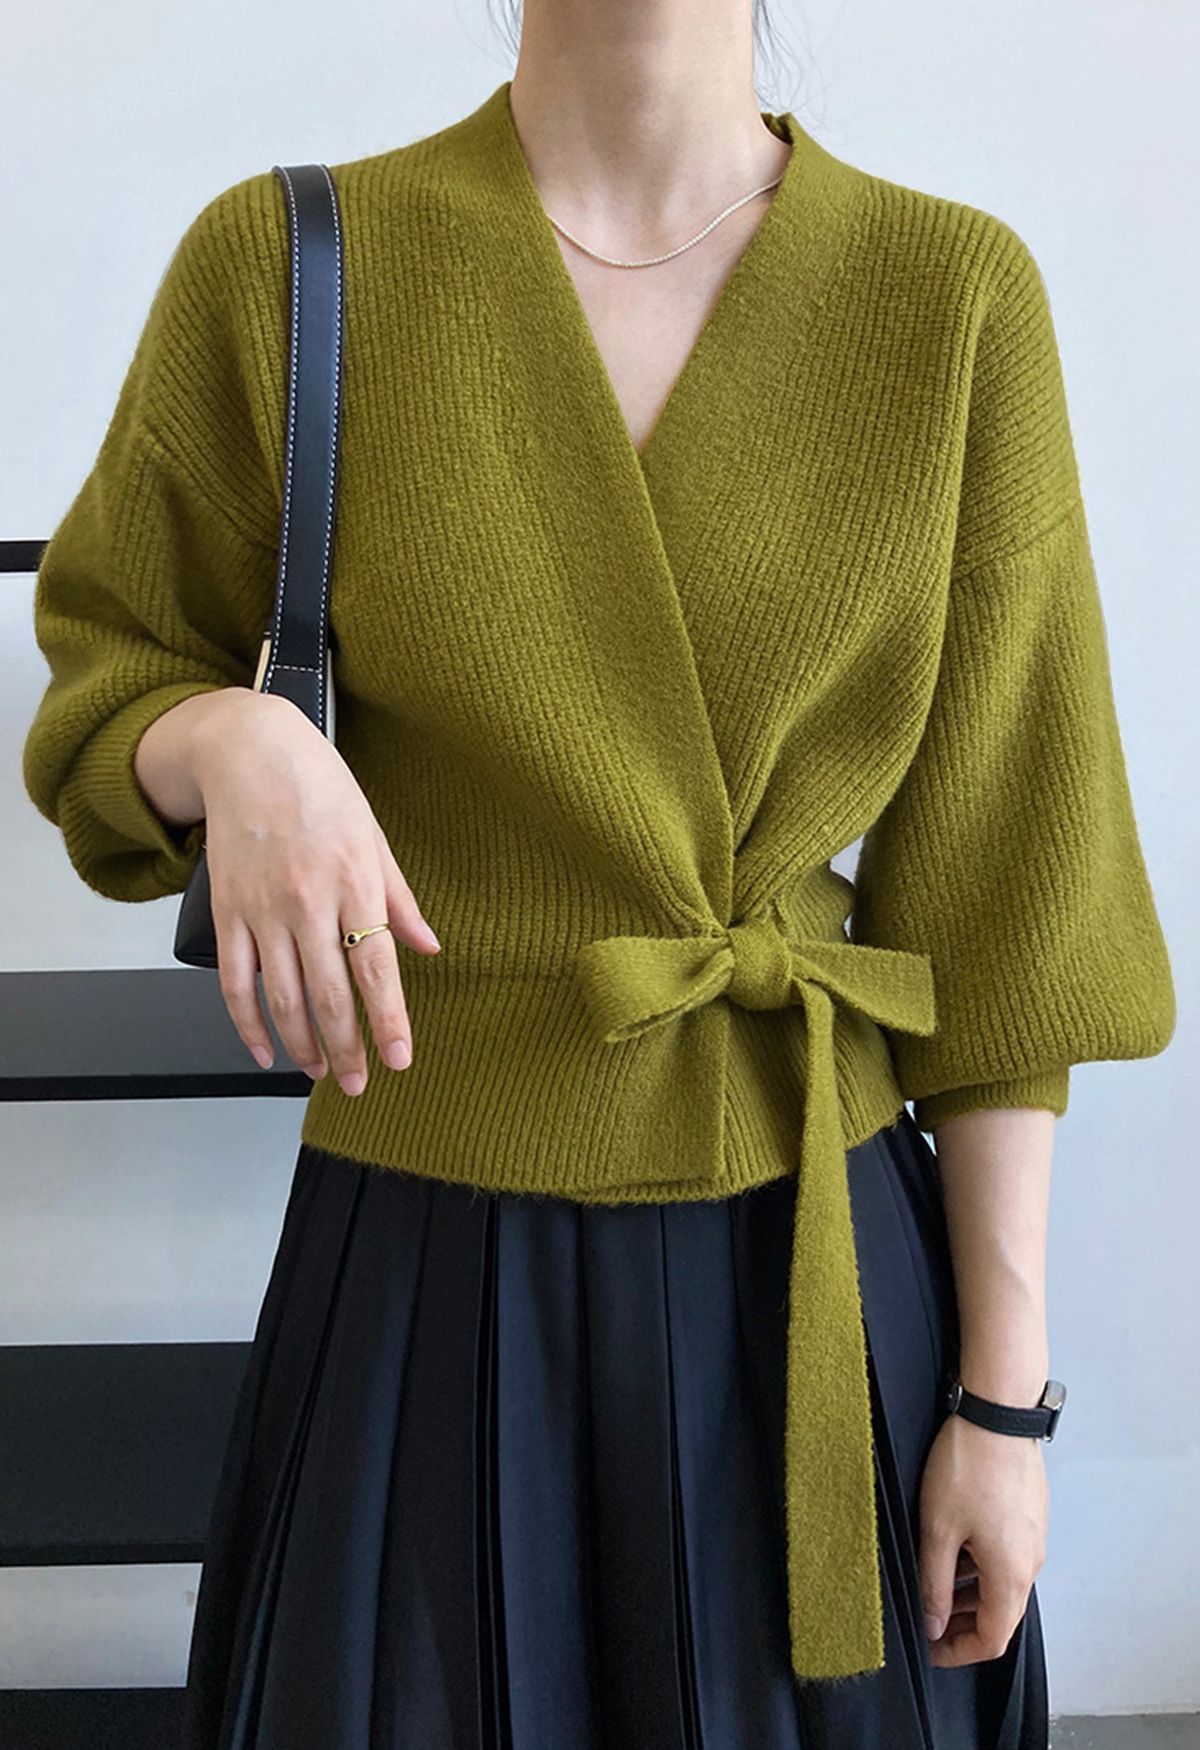 Self-Tie Bowknot Wrap Knit Top in Olive